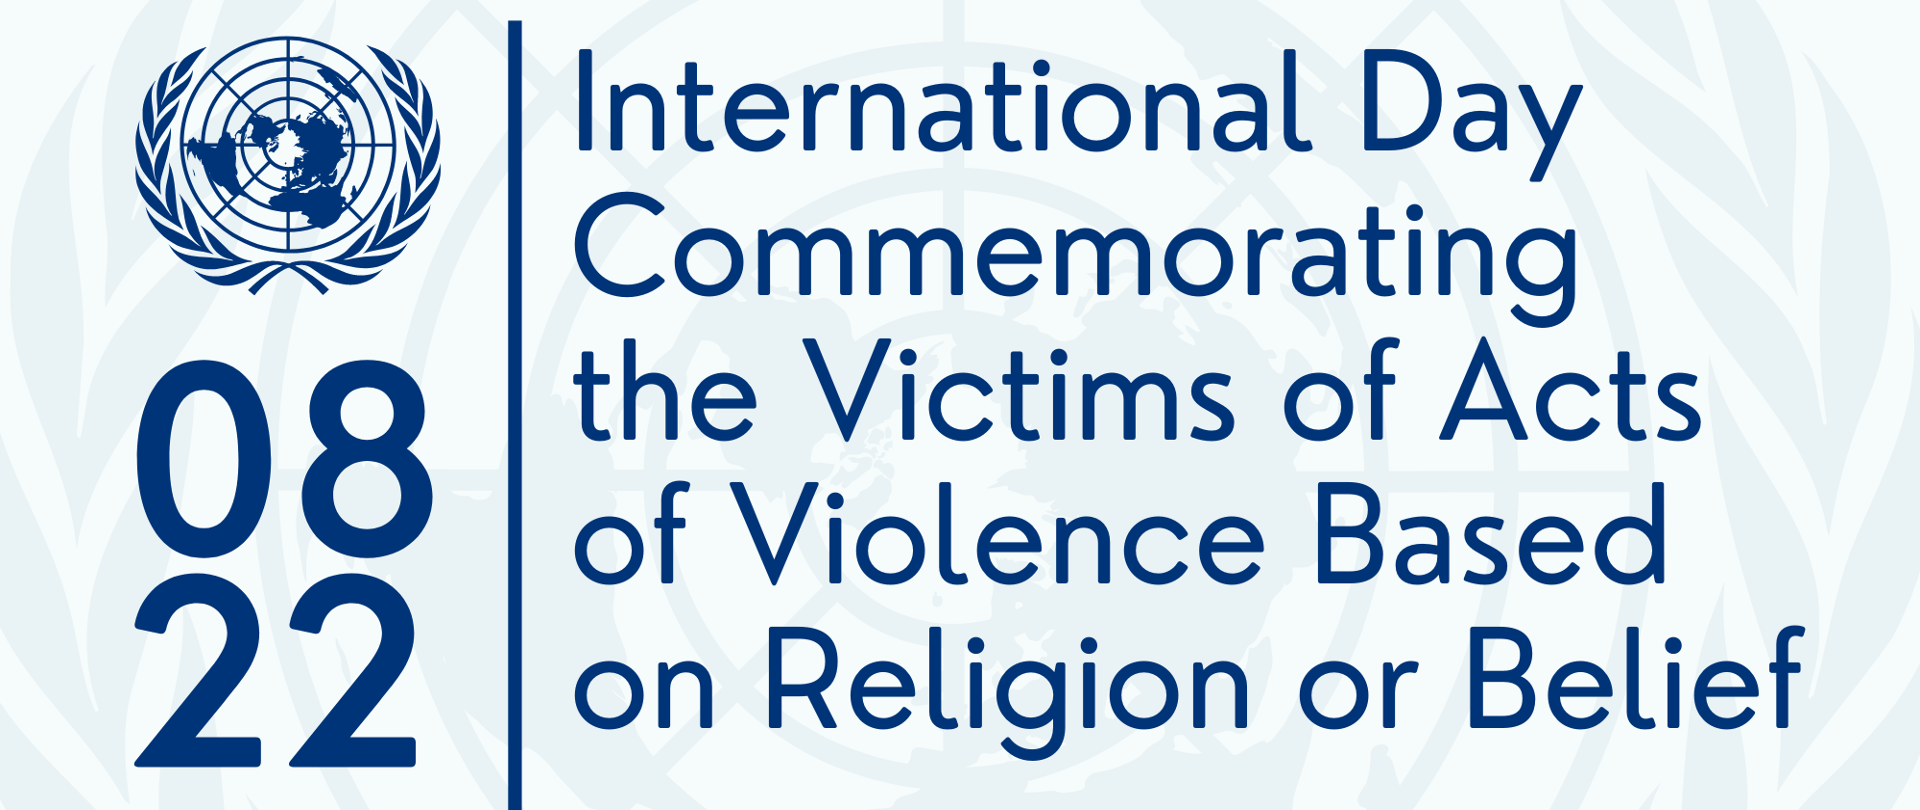 International Day Commemorating the Victims of Acts of Violence Based on Religion or Belief
